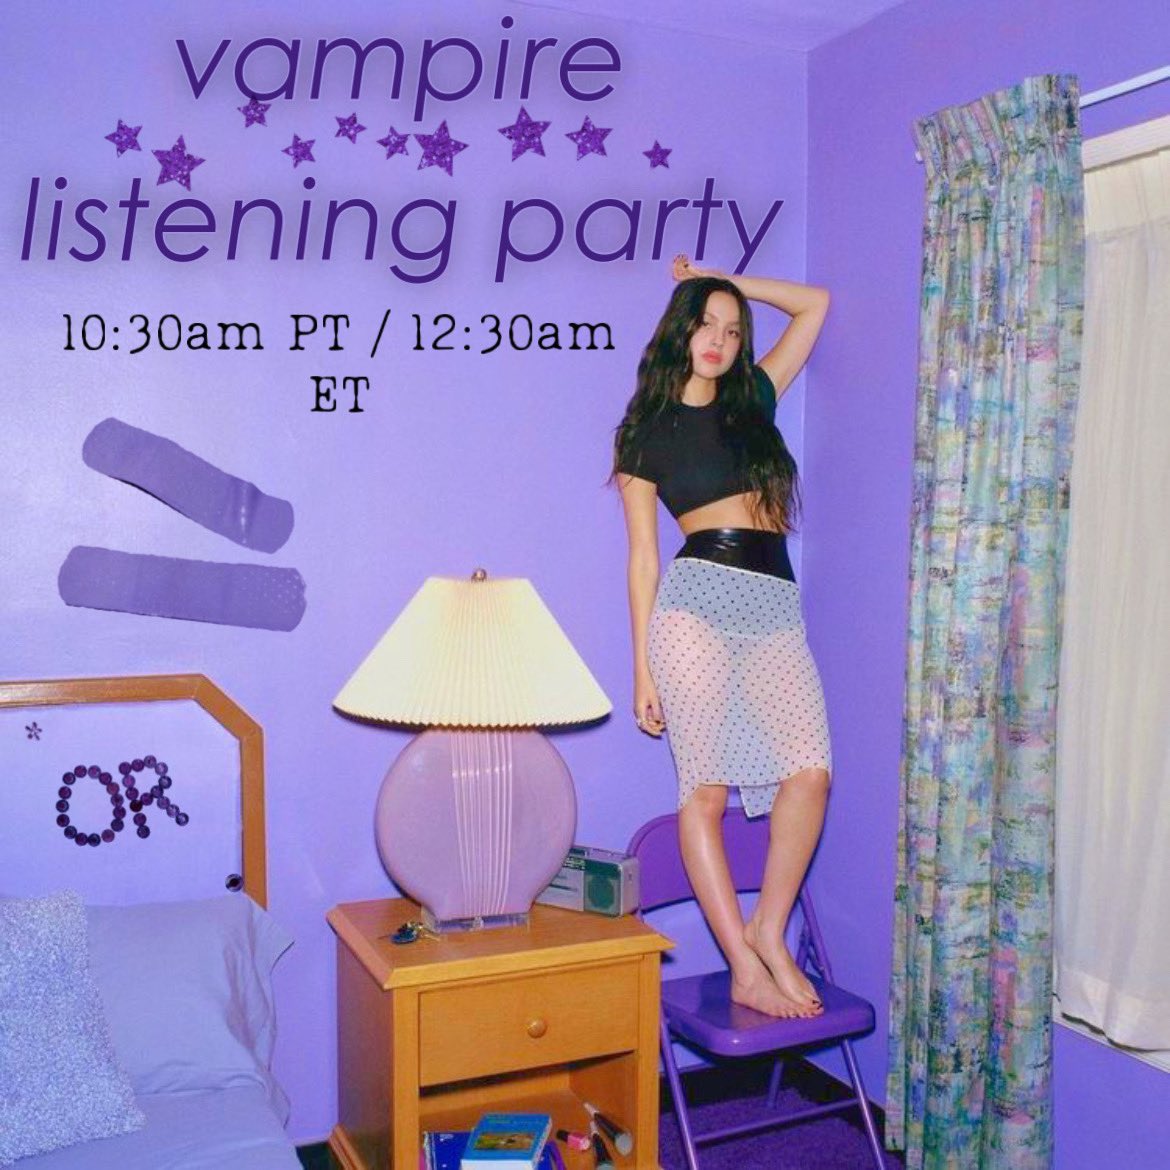 come fang with us on stationhead in less than 15mins!! #vampirelisteningparty 🧛🏻‍♀️🩸🖤 share.stationhead.com/6nabnxrUu5Y